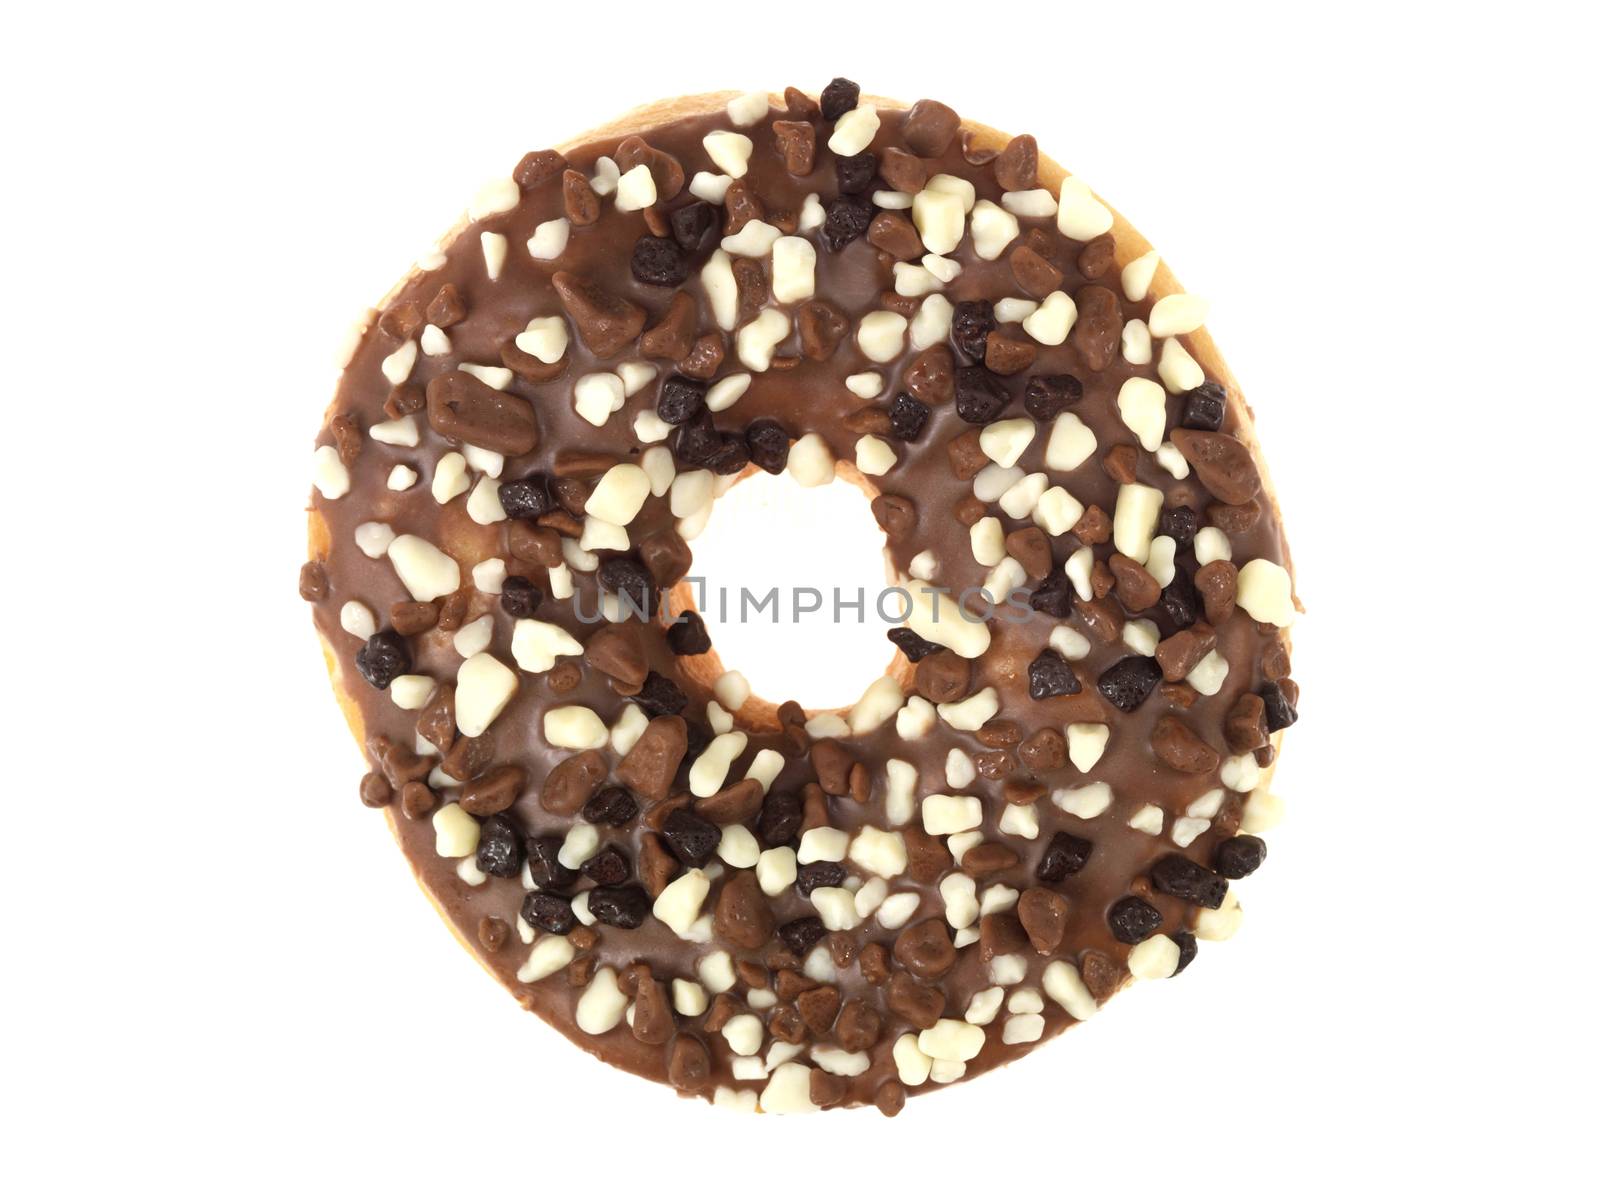 Chocolate Covered Donut by Whiteboxmedia